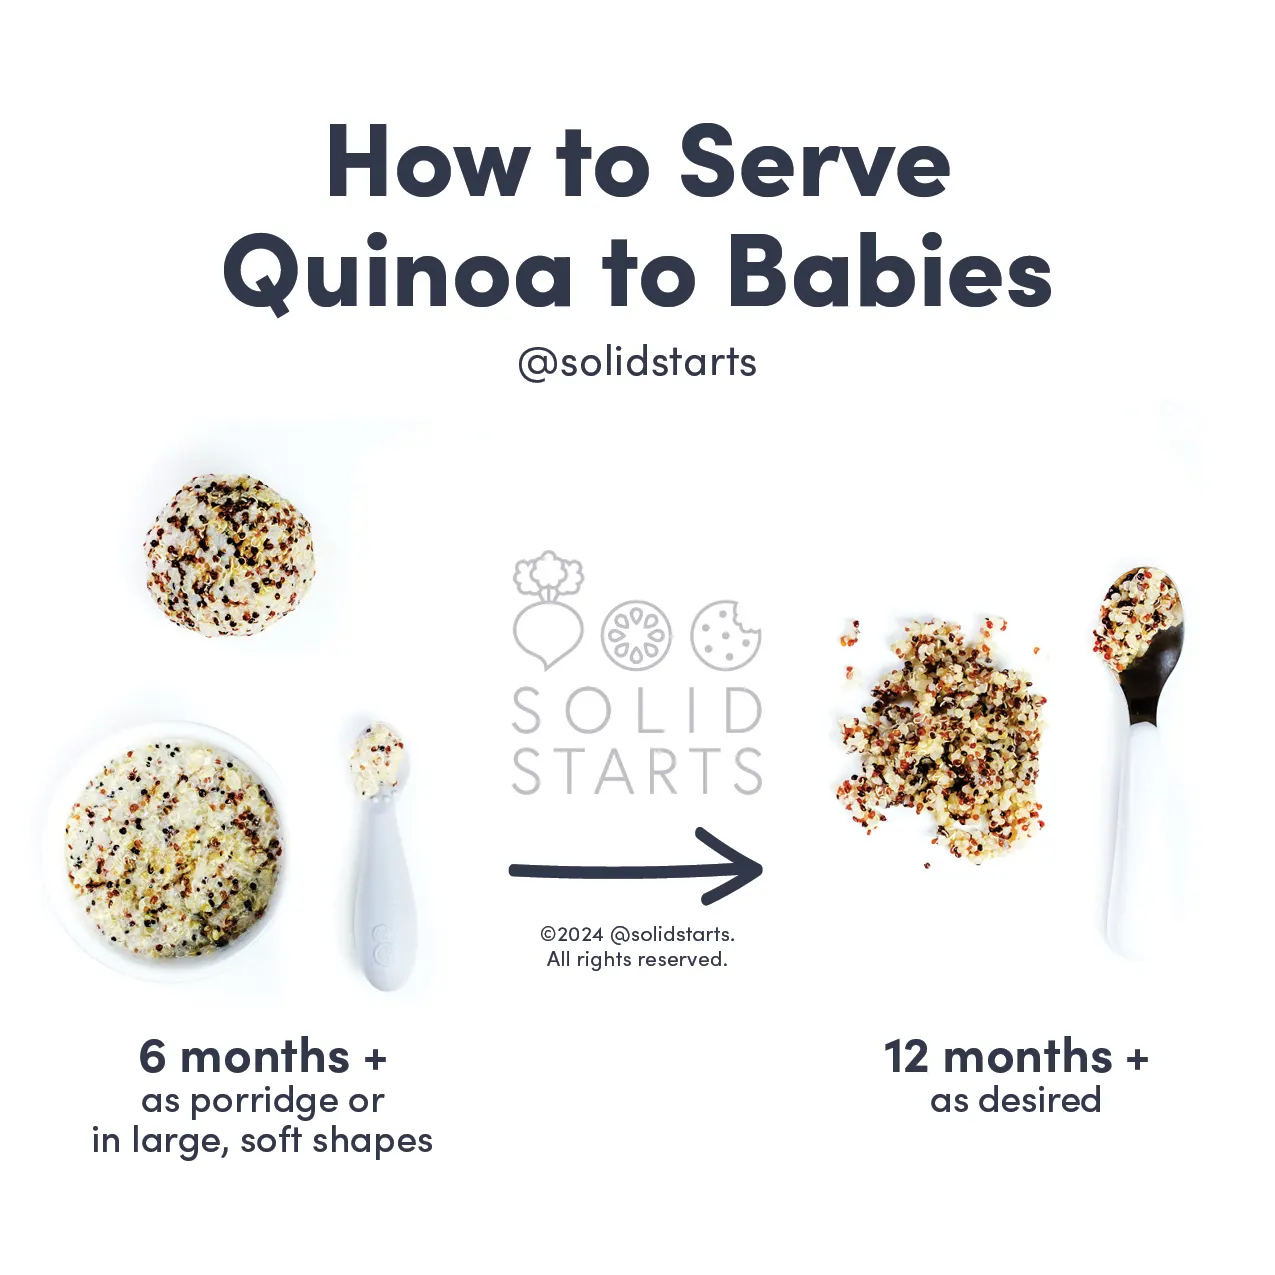 a Solid Starts infographic with the header How to Serve Quinoa to Babies: as porridge or large, soft shapes for 6 mos +, as desired for 12 mos+